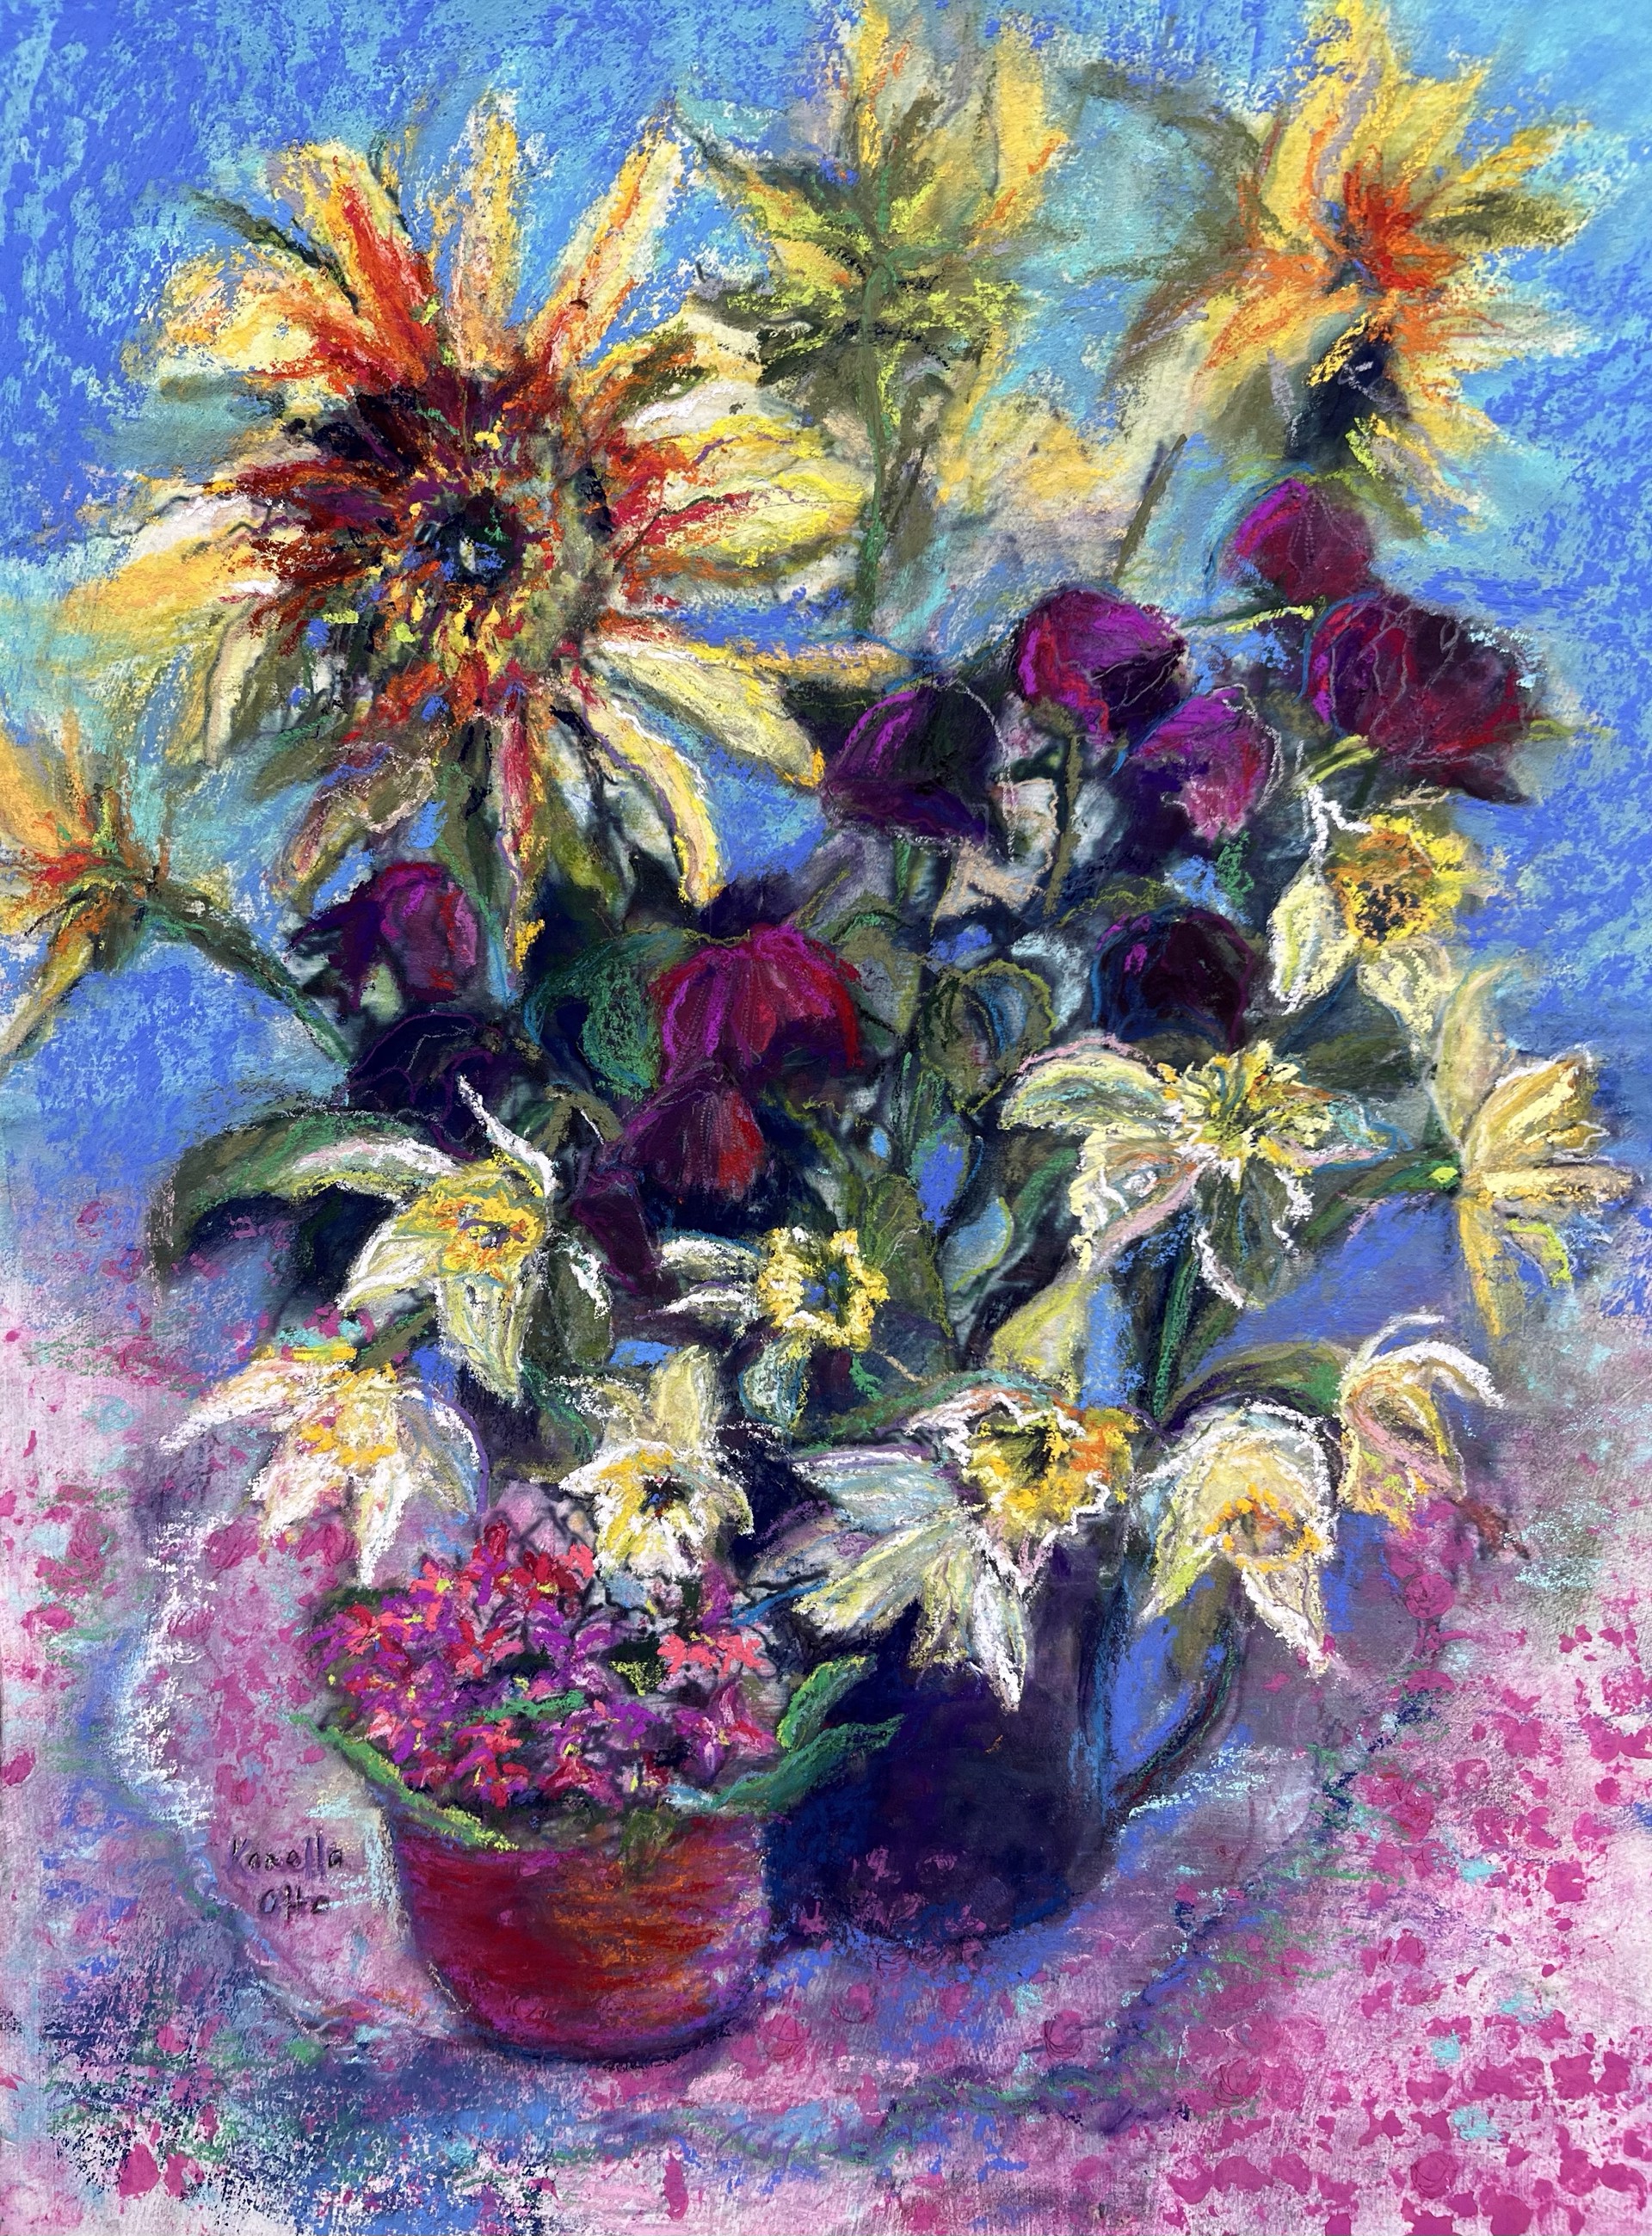 Flowers Gathered to Paint by Kanella Otto